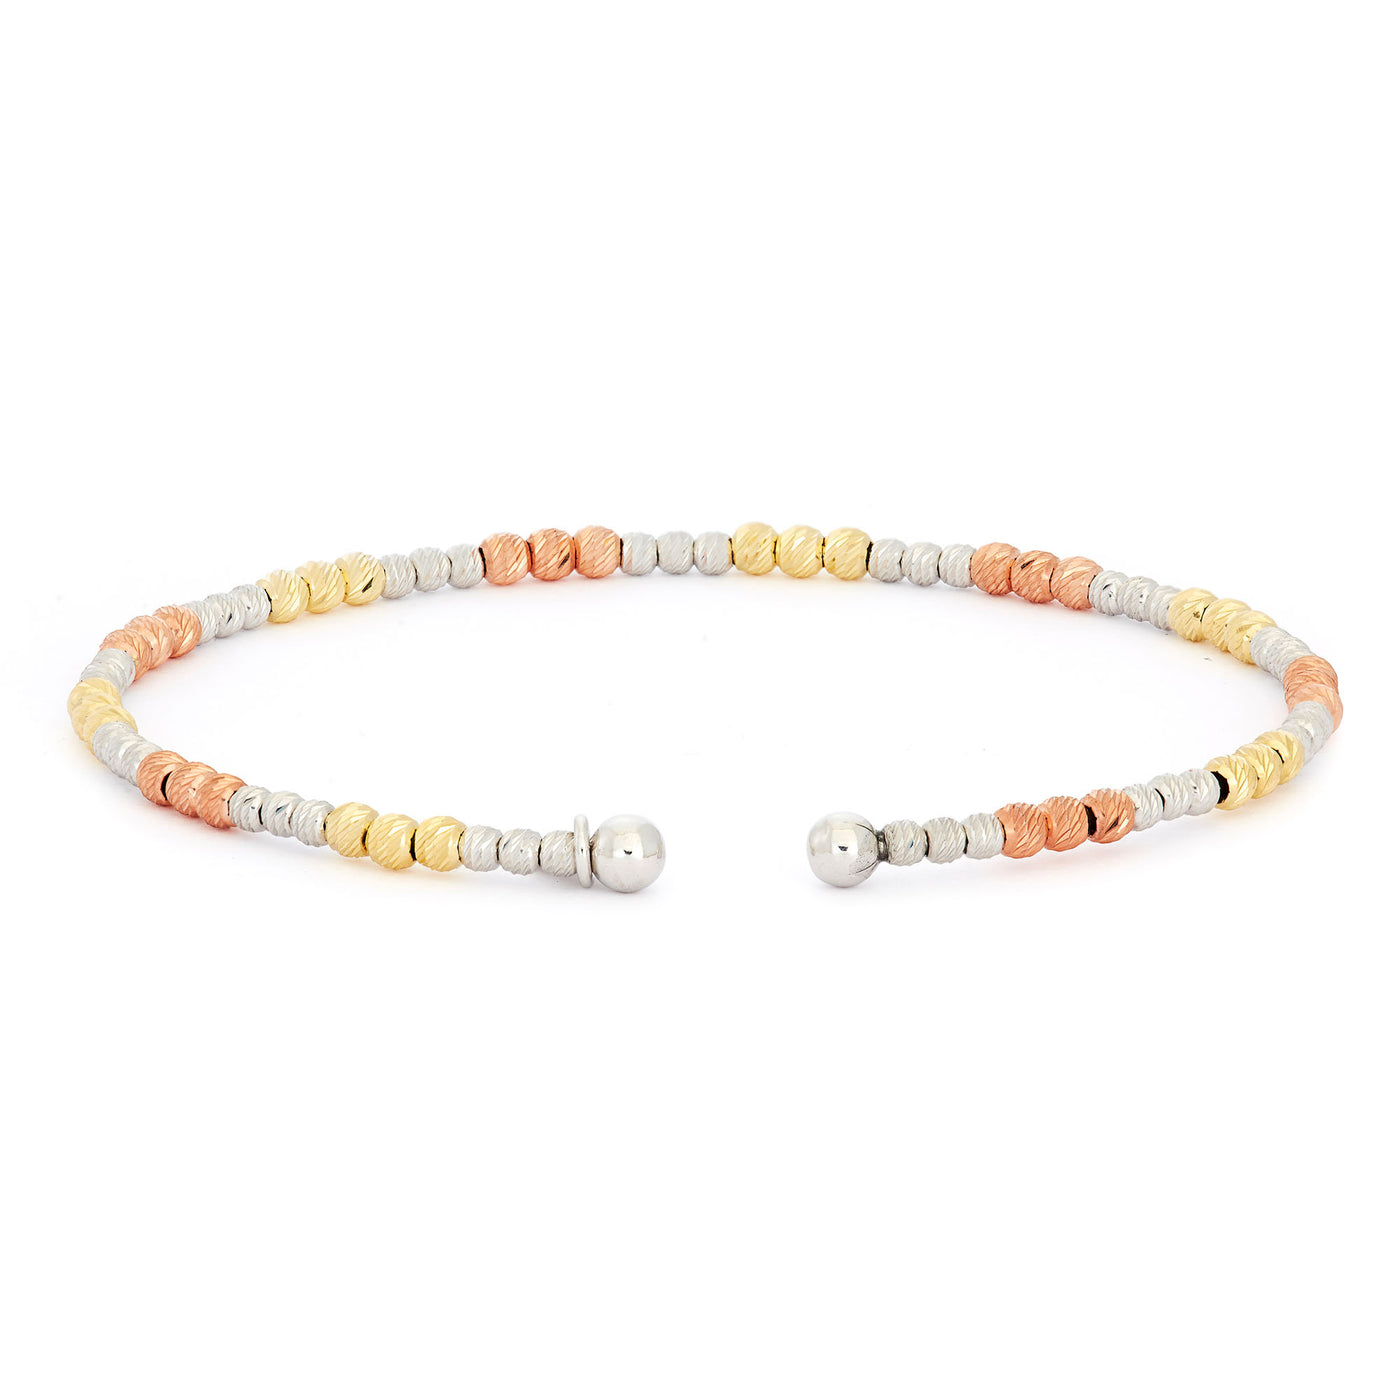 Rebecca Sloane Tri-Color Silver Station Bangle with Faceted Beads